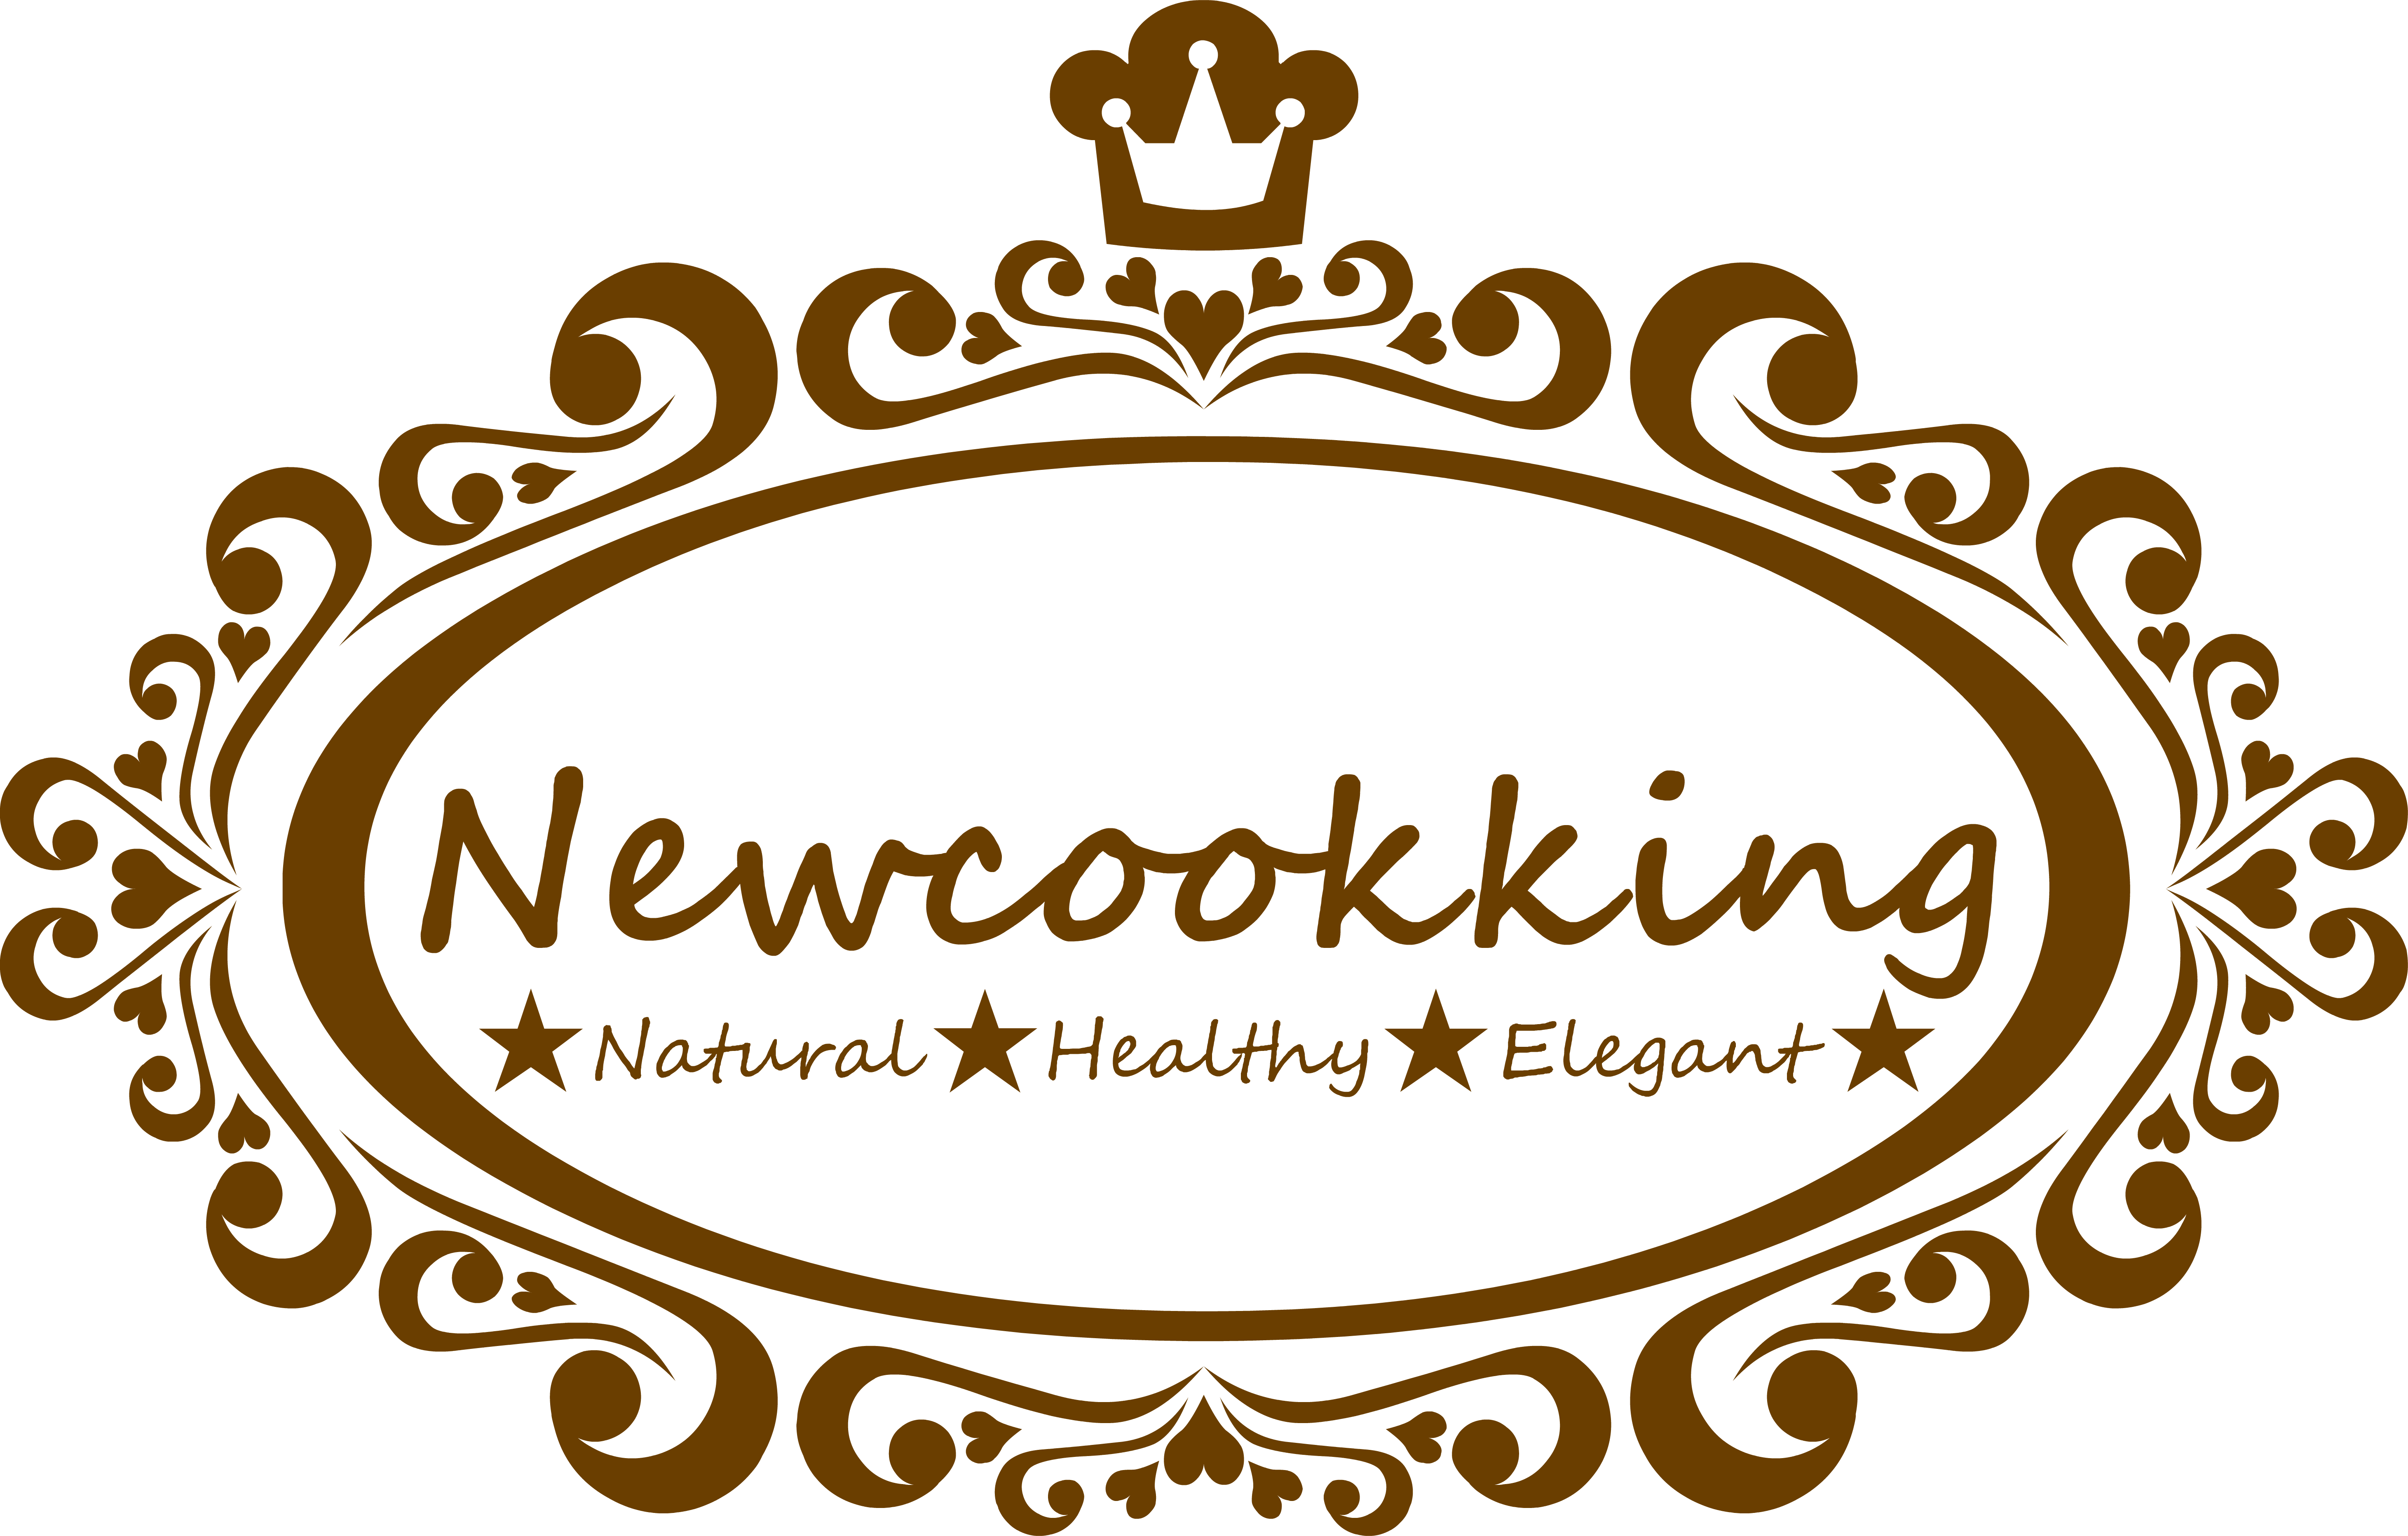 Newcookking